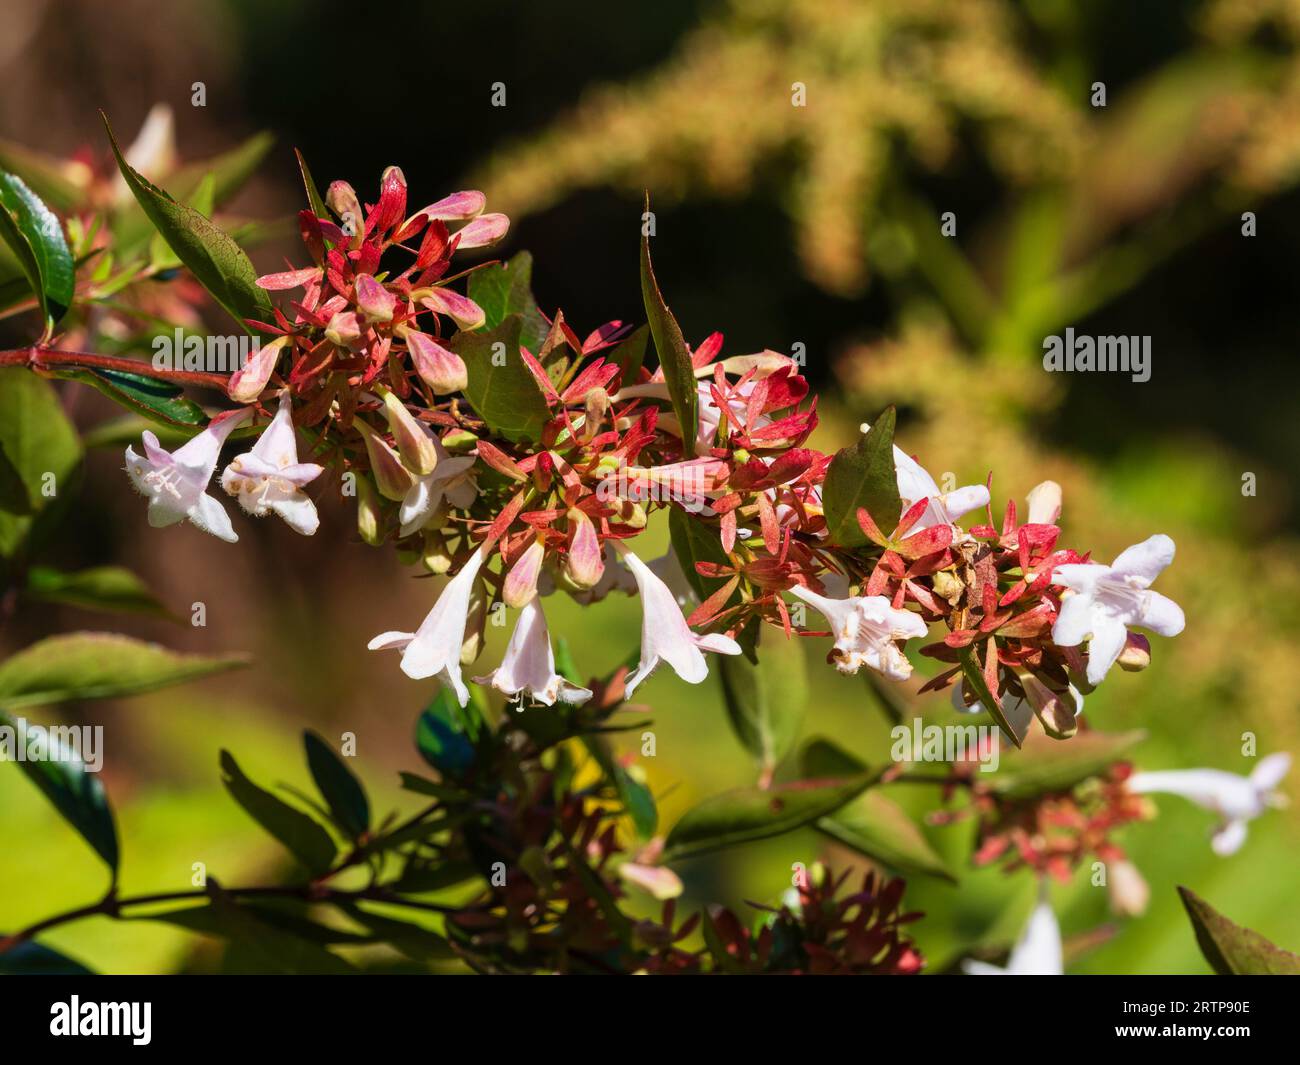 White flowers and red calyces of the hardy evergreen, late summer to autumn flowering shrub, Abelia x grandiflora Stock Photo